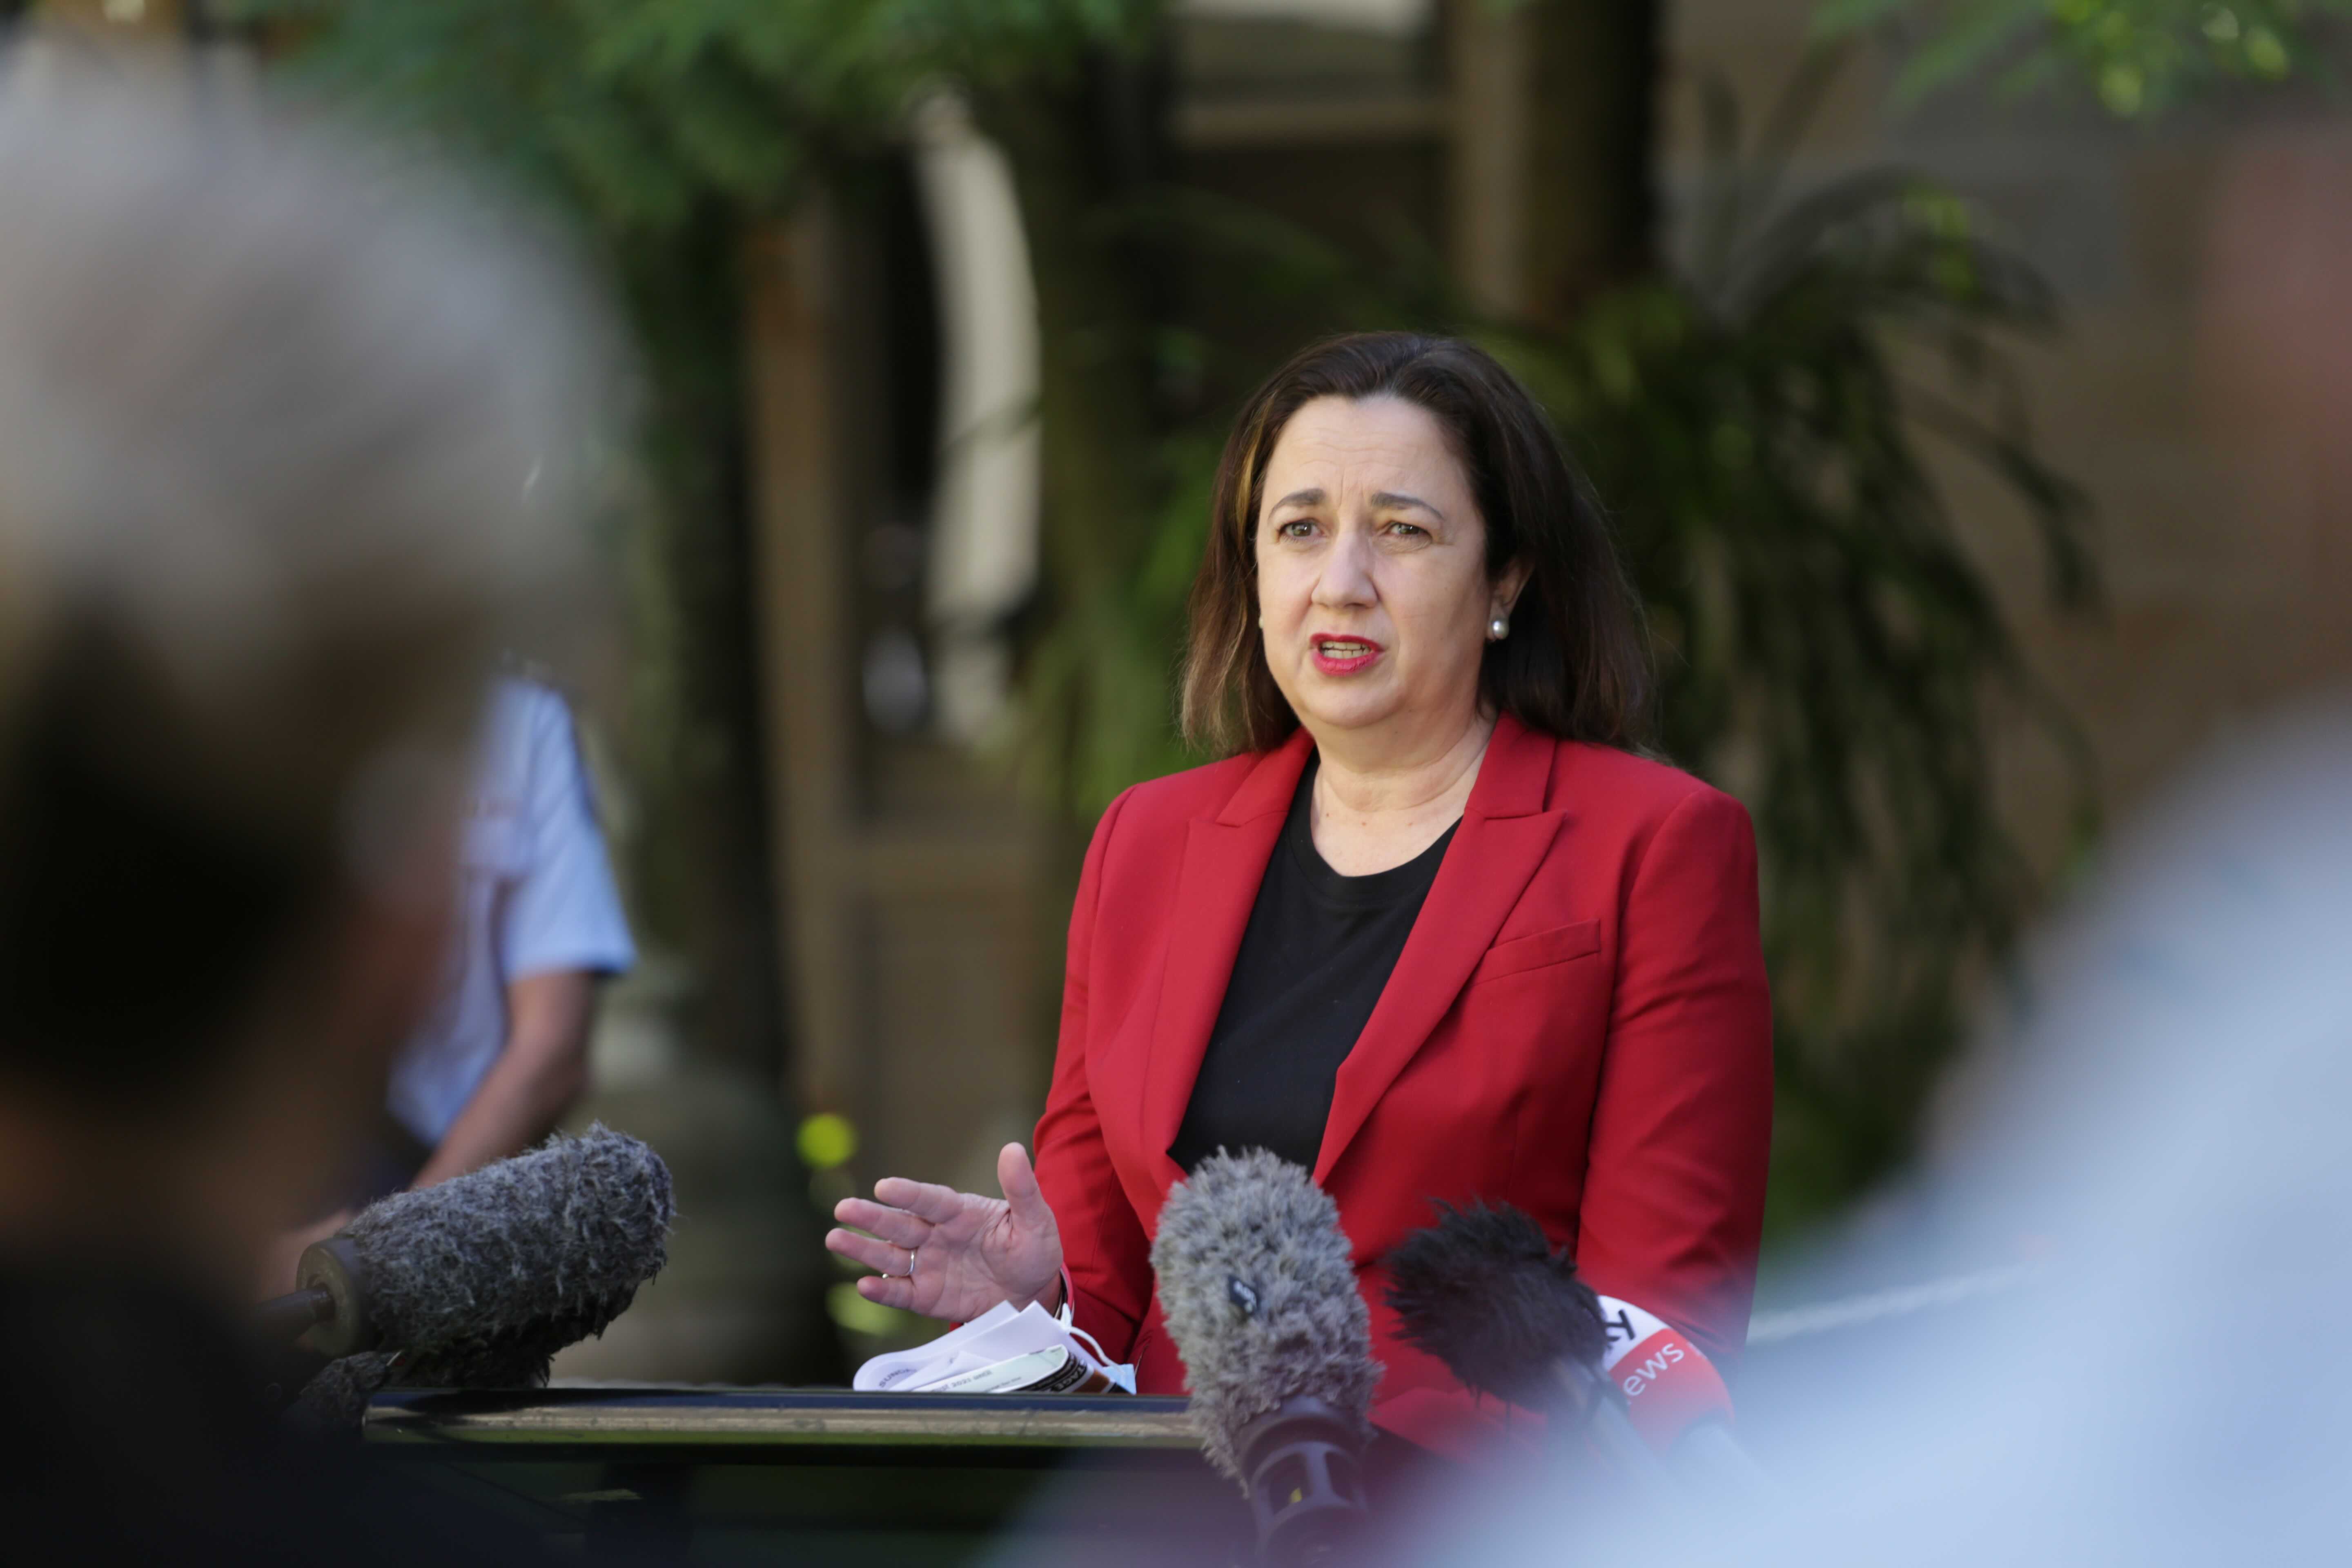 Ms Palaszczuk said she has requested more research on how opening up Queensland would impact young children as her government comes under pressure to commit to the Federal Government's plan as COVID-19 vaccination rates increase.